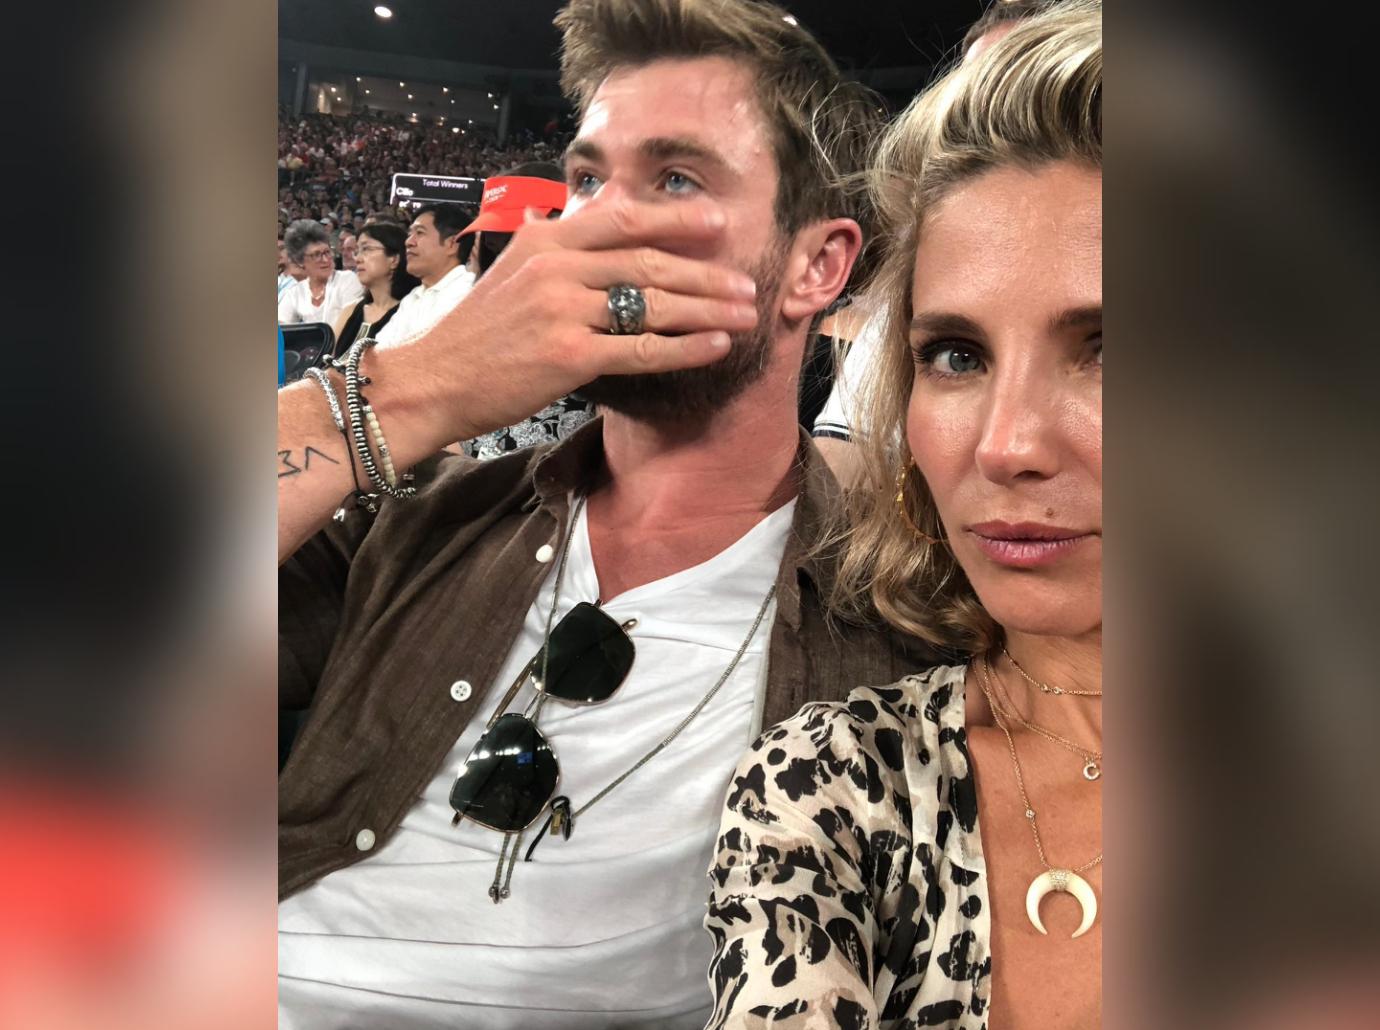 Chris Hemsworth apologises for cultural appropriation for Native